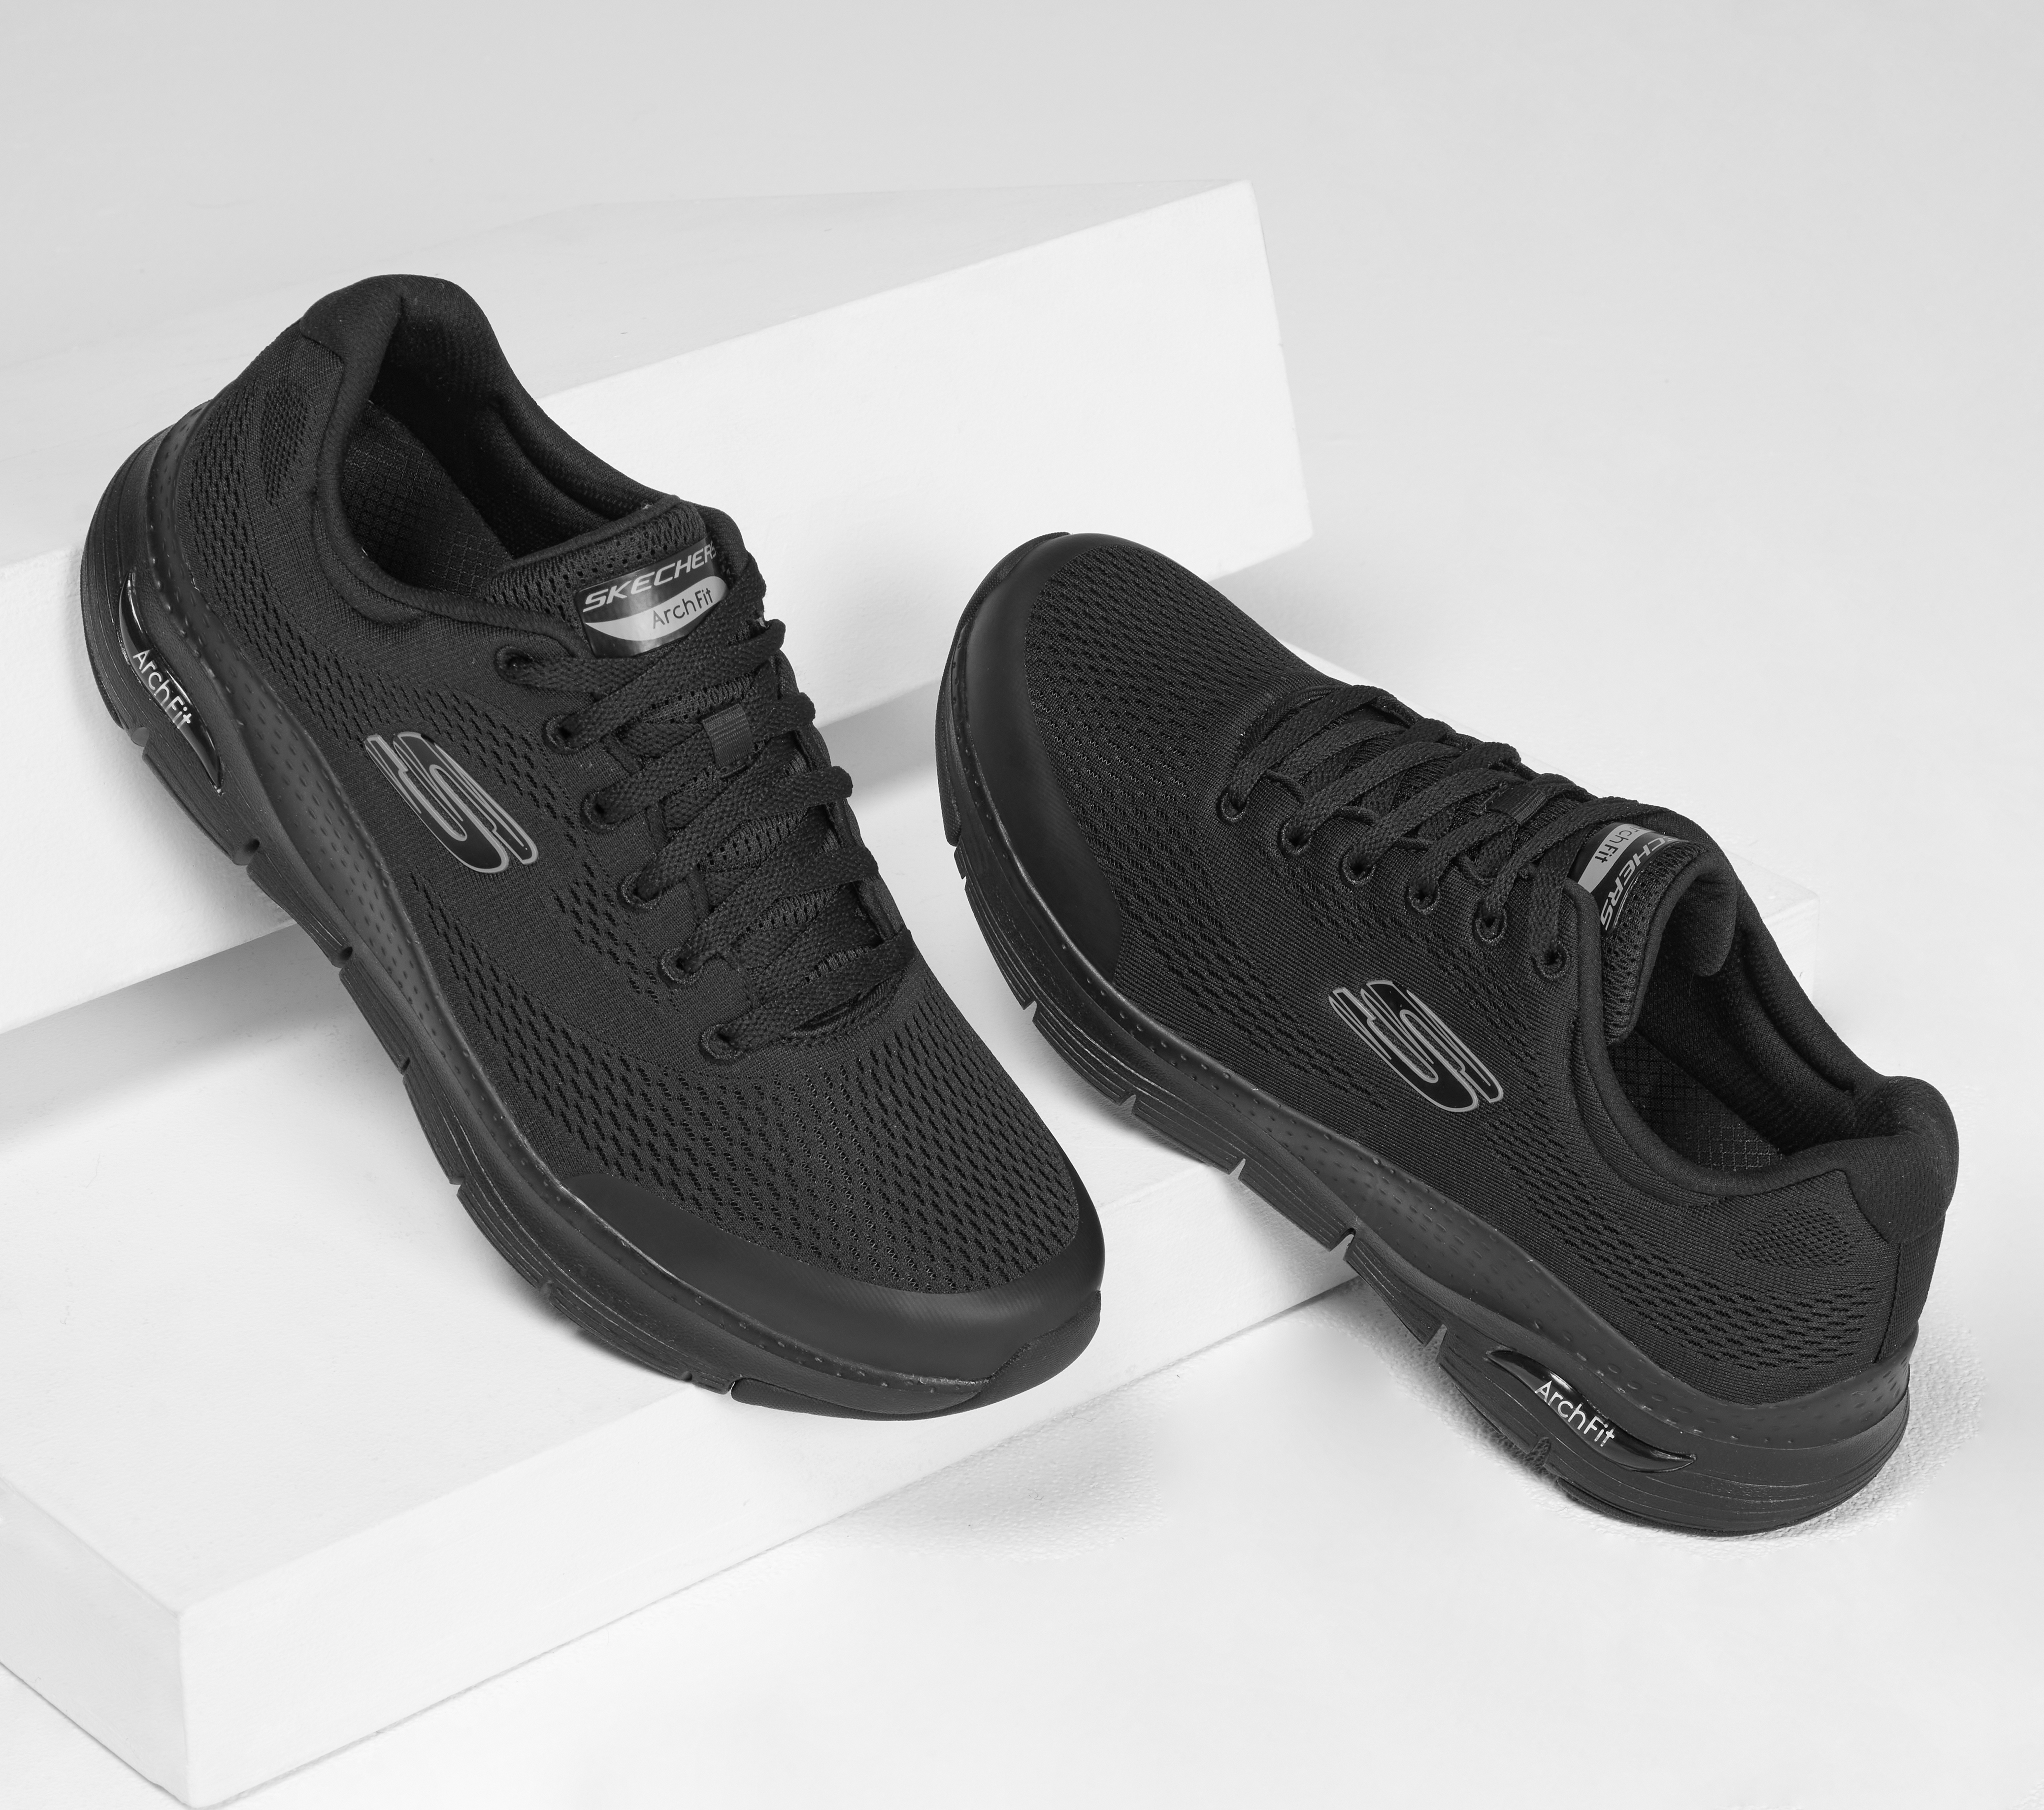 Are Skechers Arch Fit Good Walking Shoes?